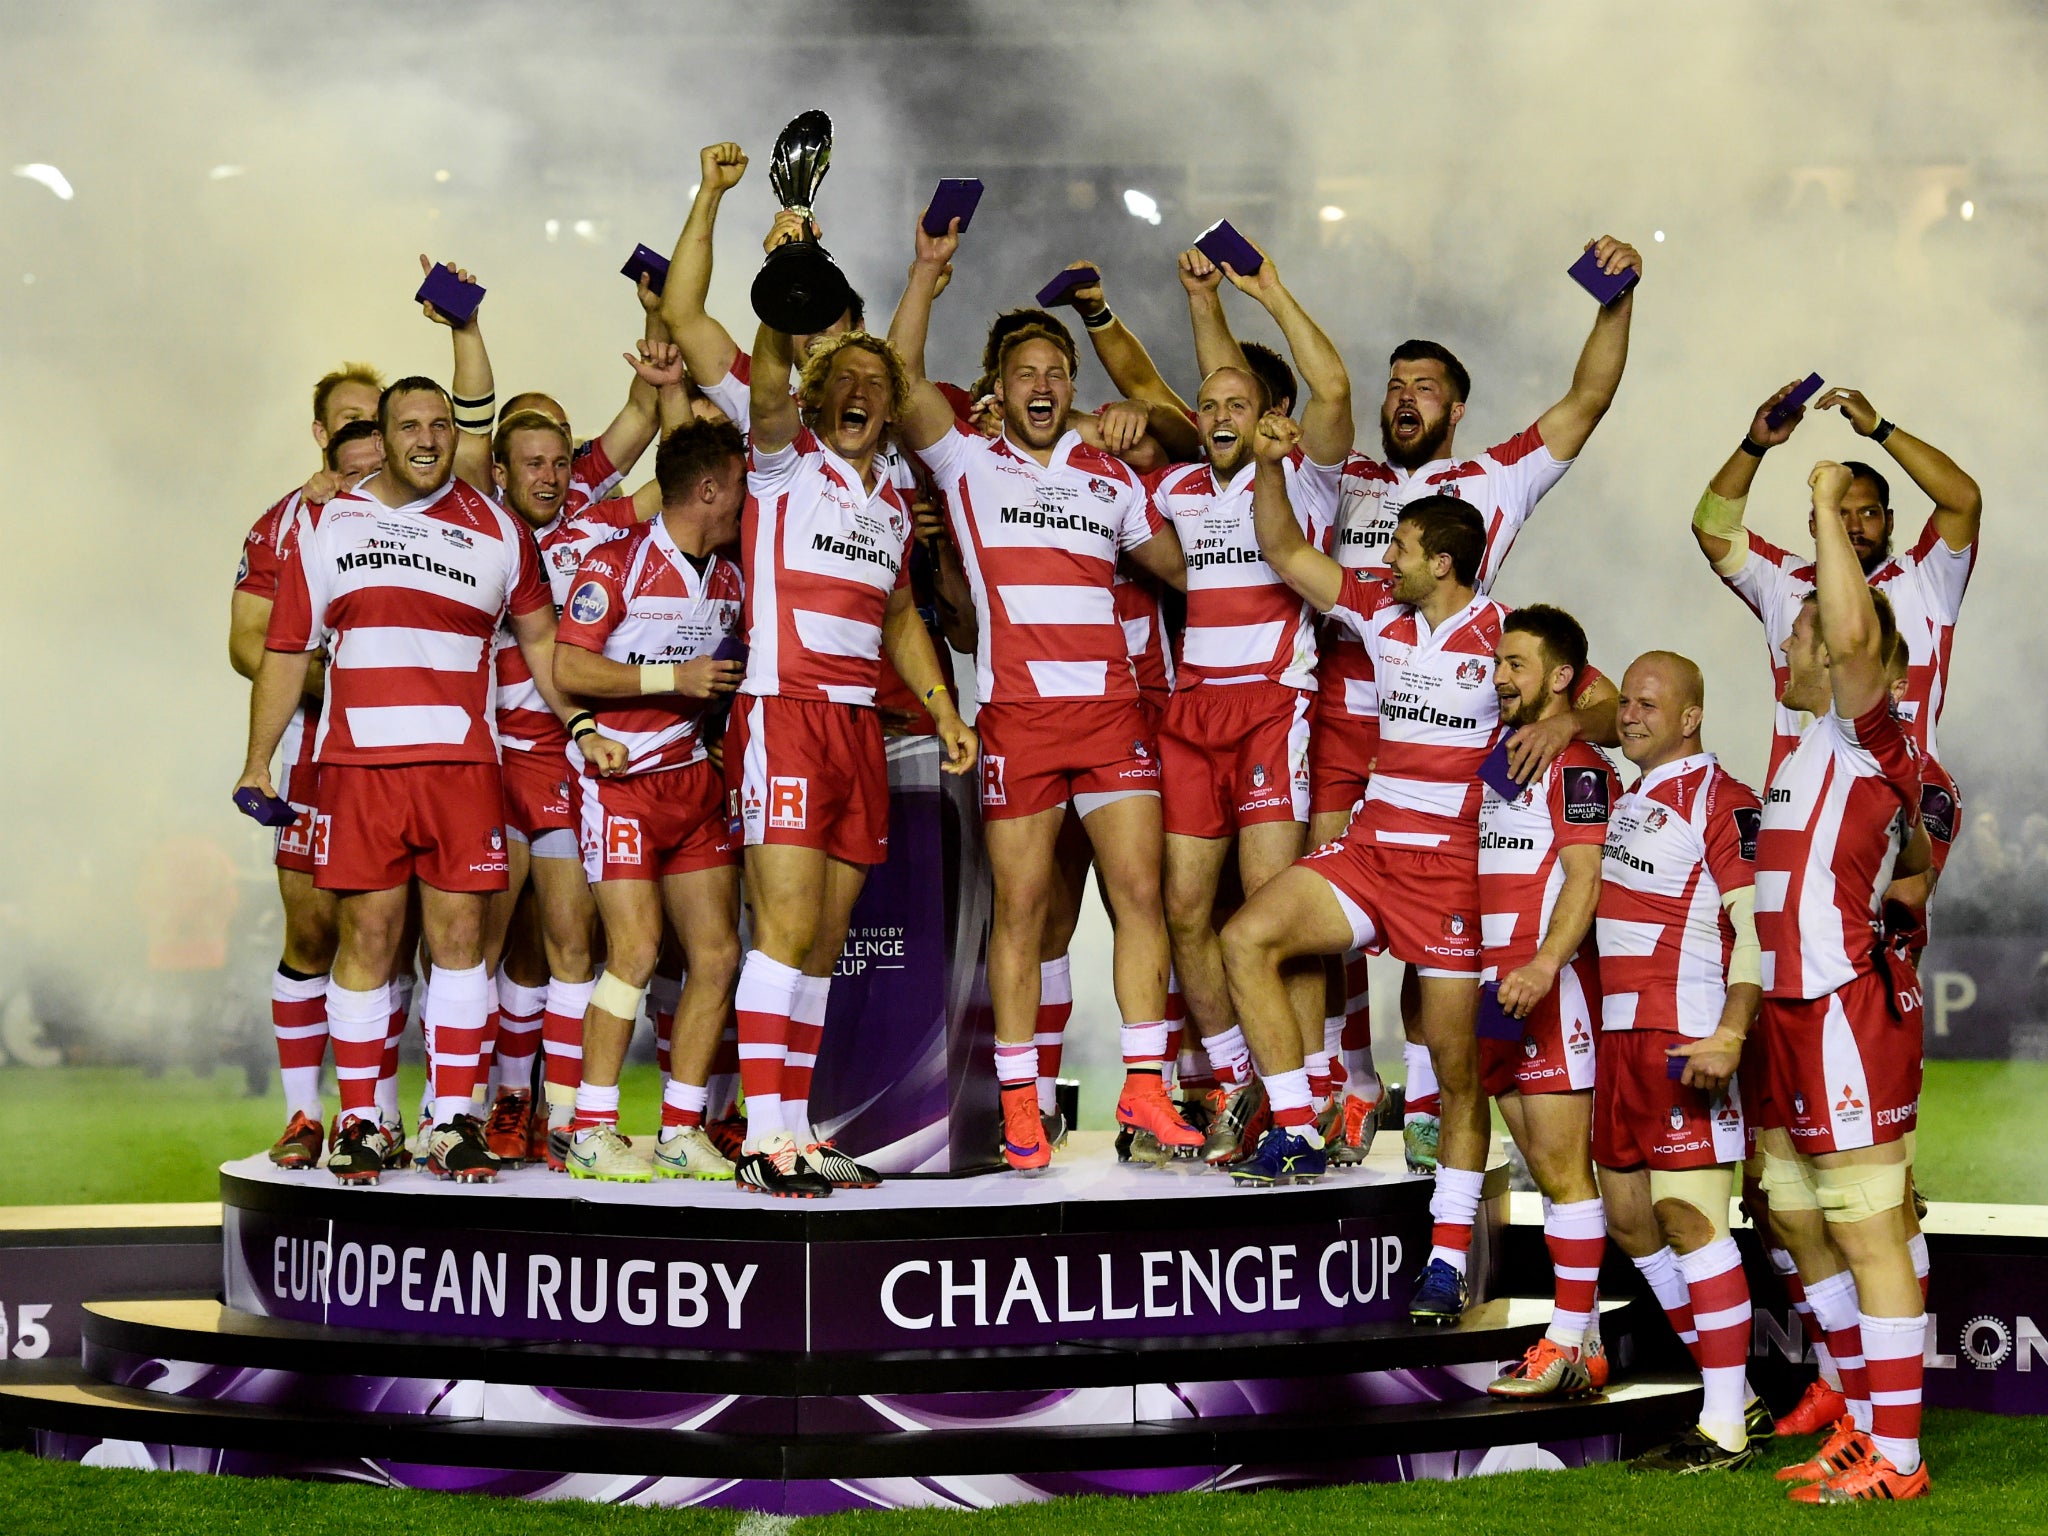 Gloucester last won the Challenge Cup in 2014